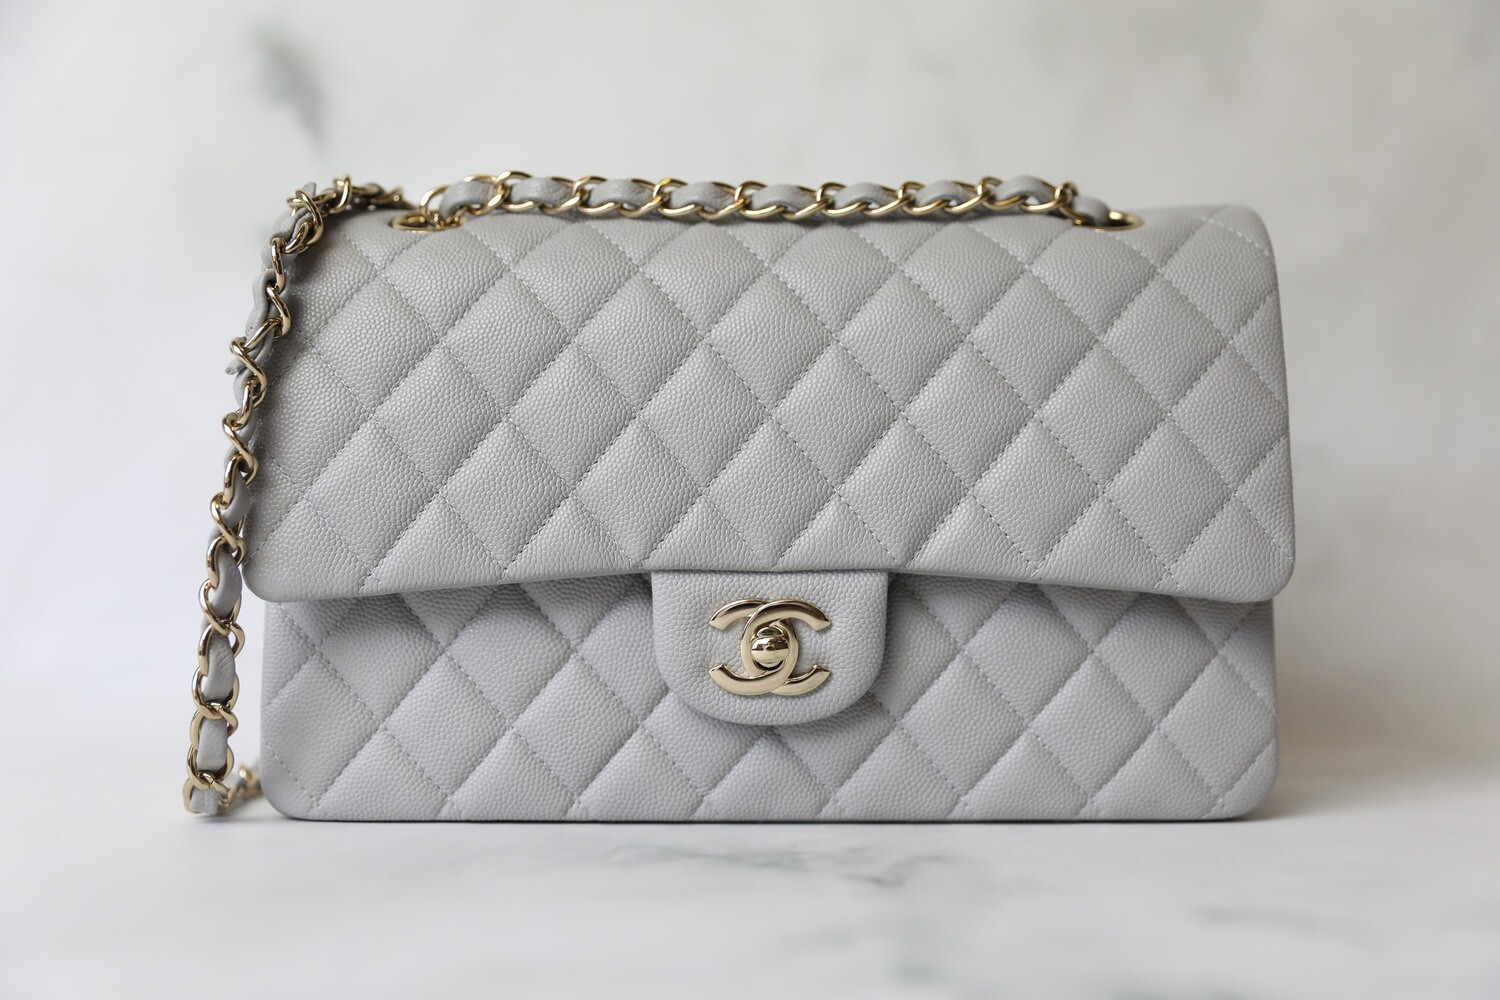 Chanel Classic Medium Double Flap, 21A Grey Caviar Leather, Gold Hardware,  New in Box